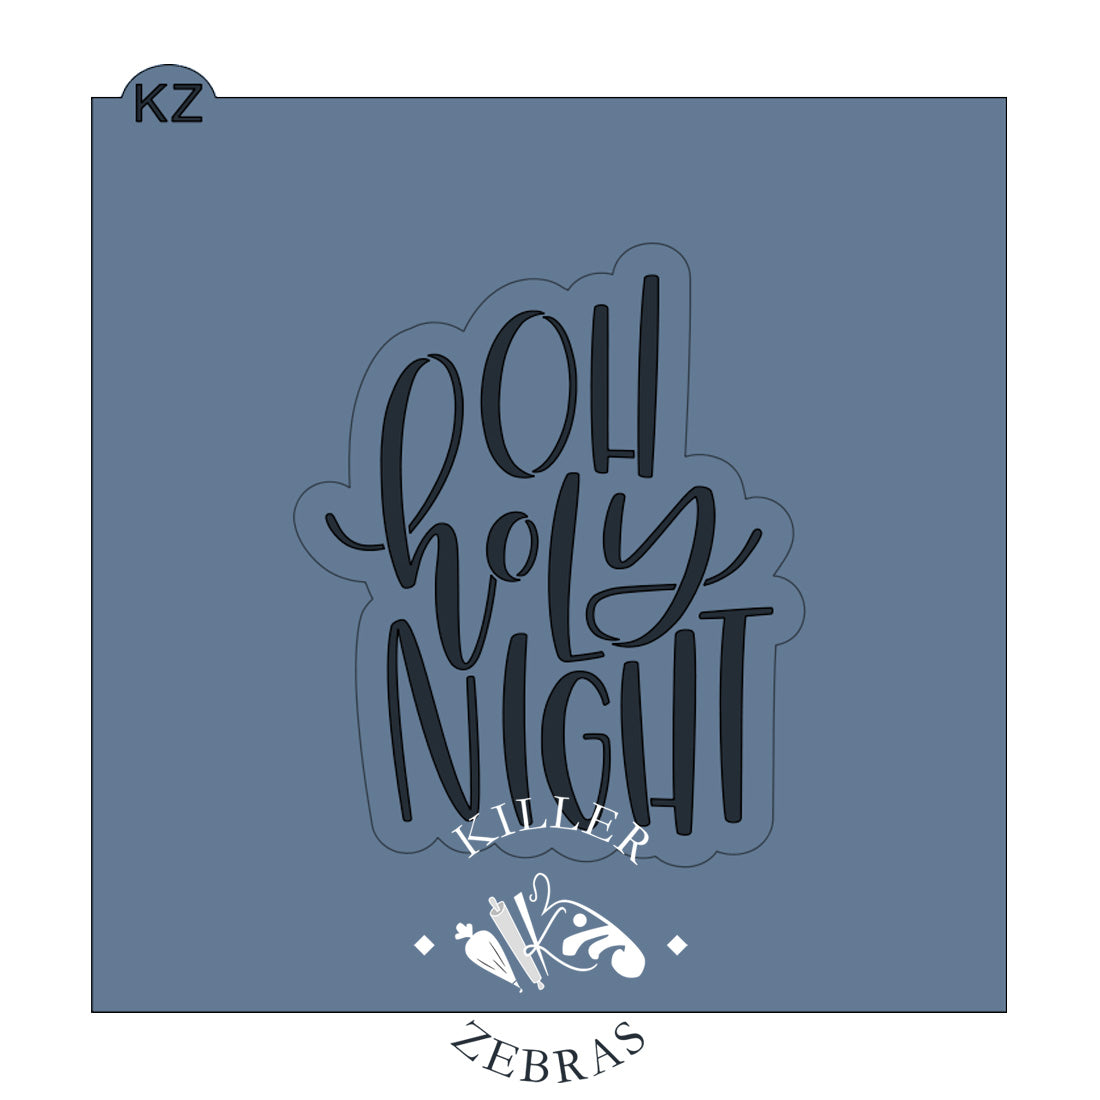 Oh Holy Night Hand Lettered